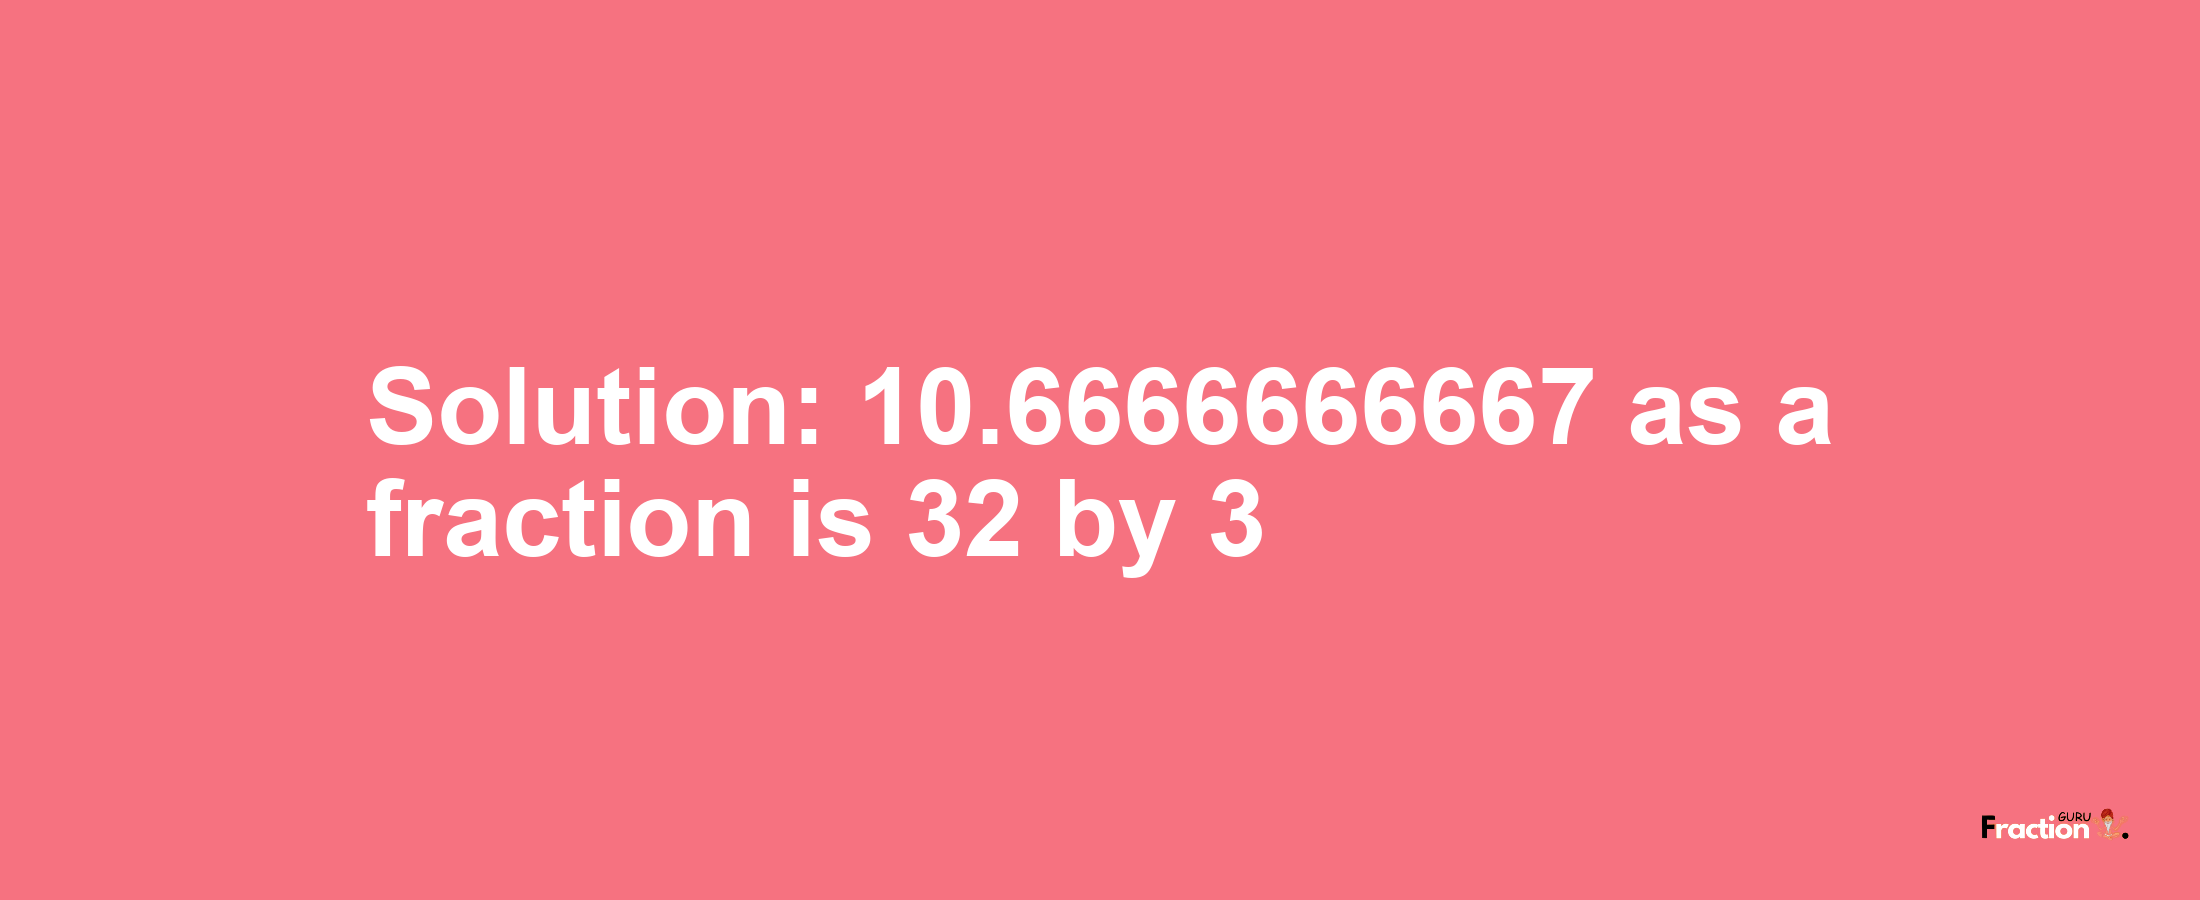 Solution:10.6666666667 as a fraction is 32/3